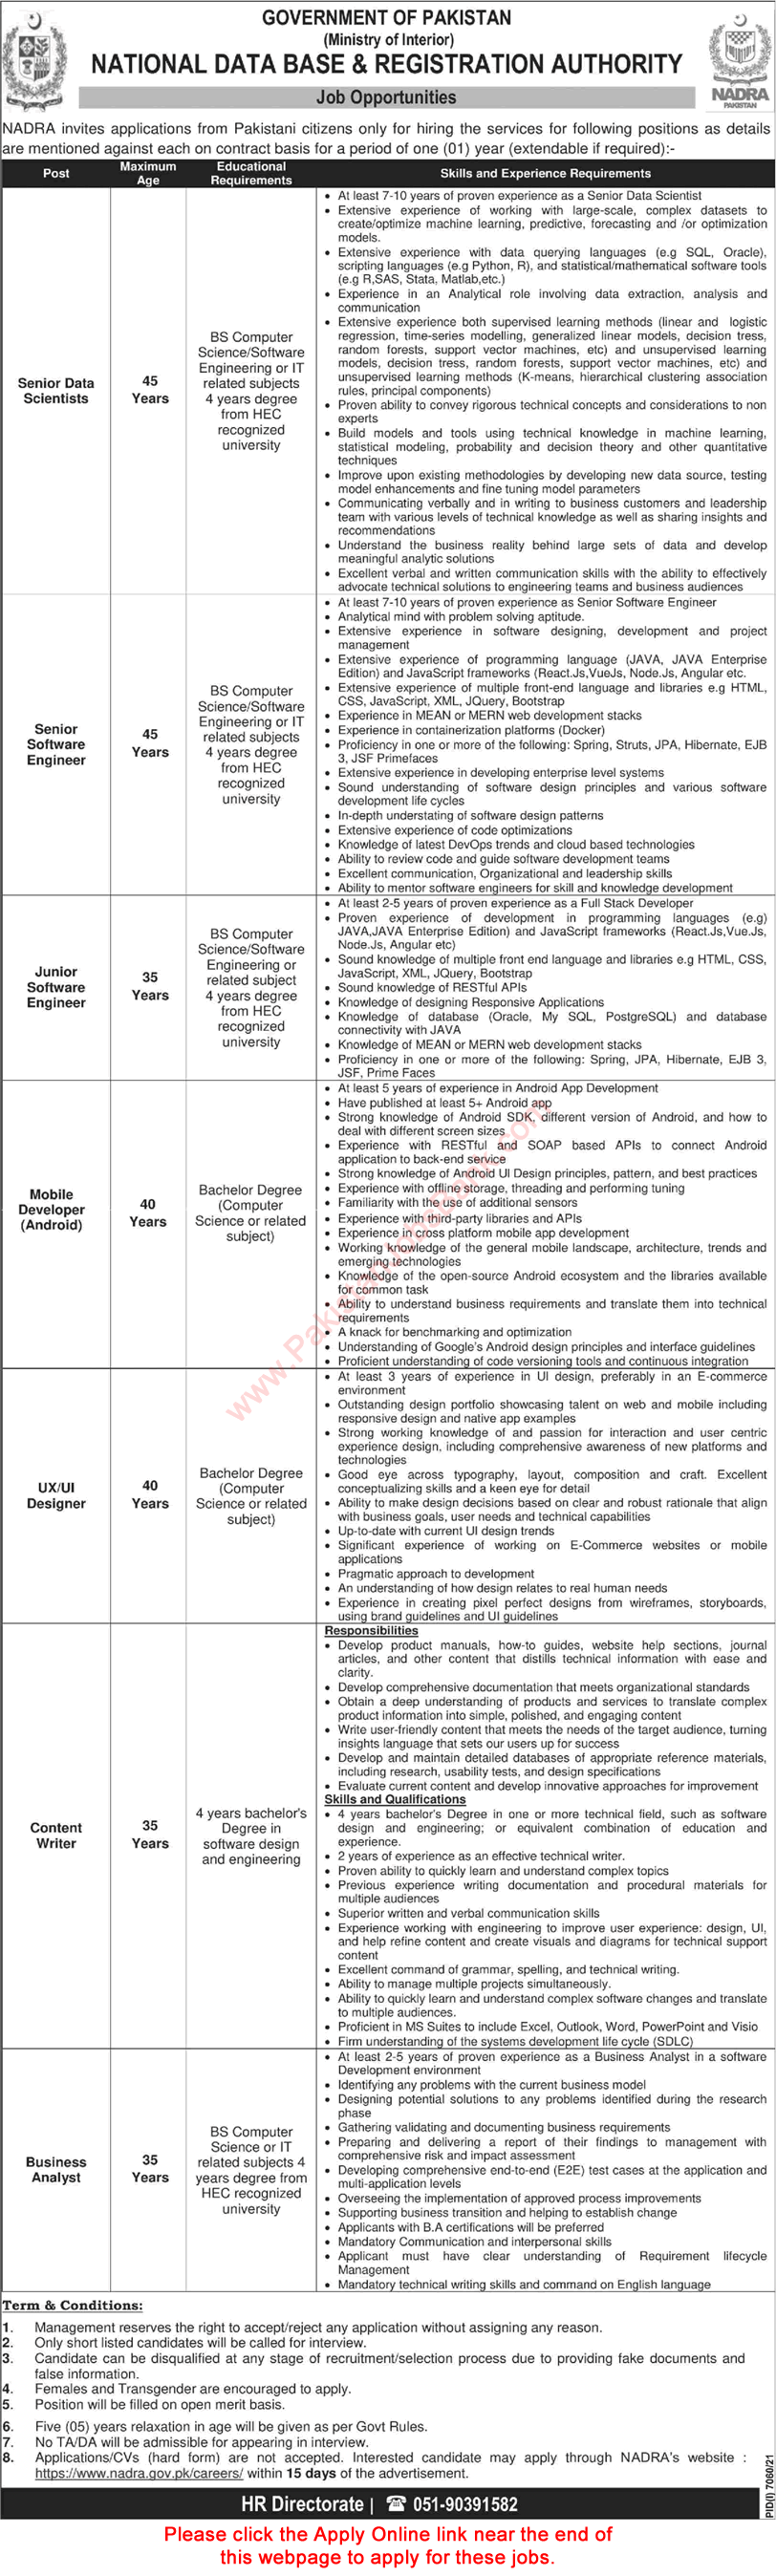 NADRA Jobs April 2022 Apply Online Software Engineers & Others National Database & Registration Authority Latest